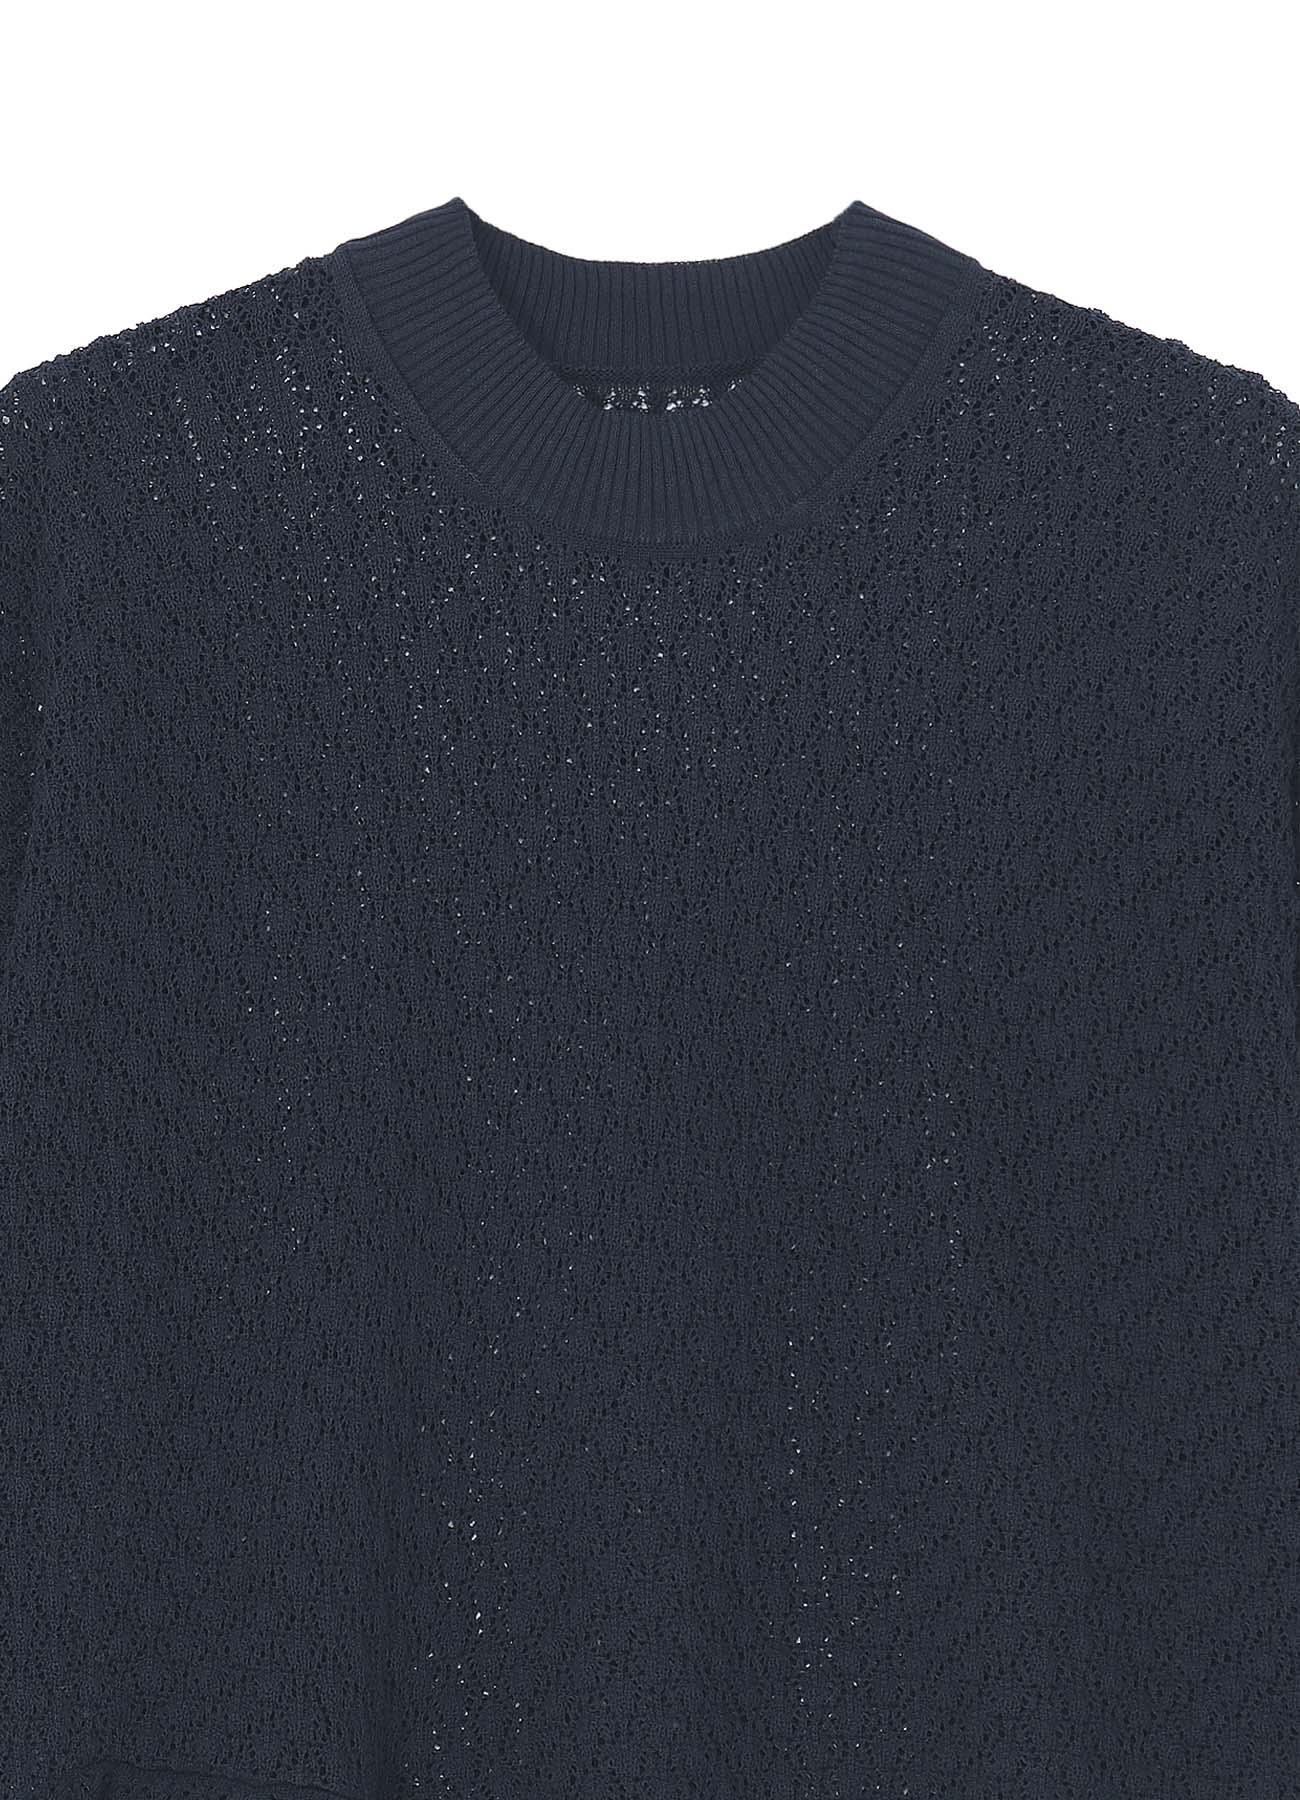 OPENWORK KNIT CUT OUT DETAIL SLV SWEATER